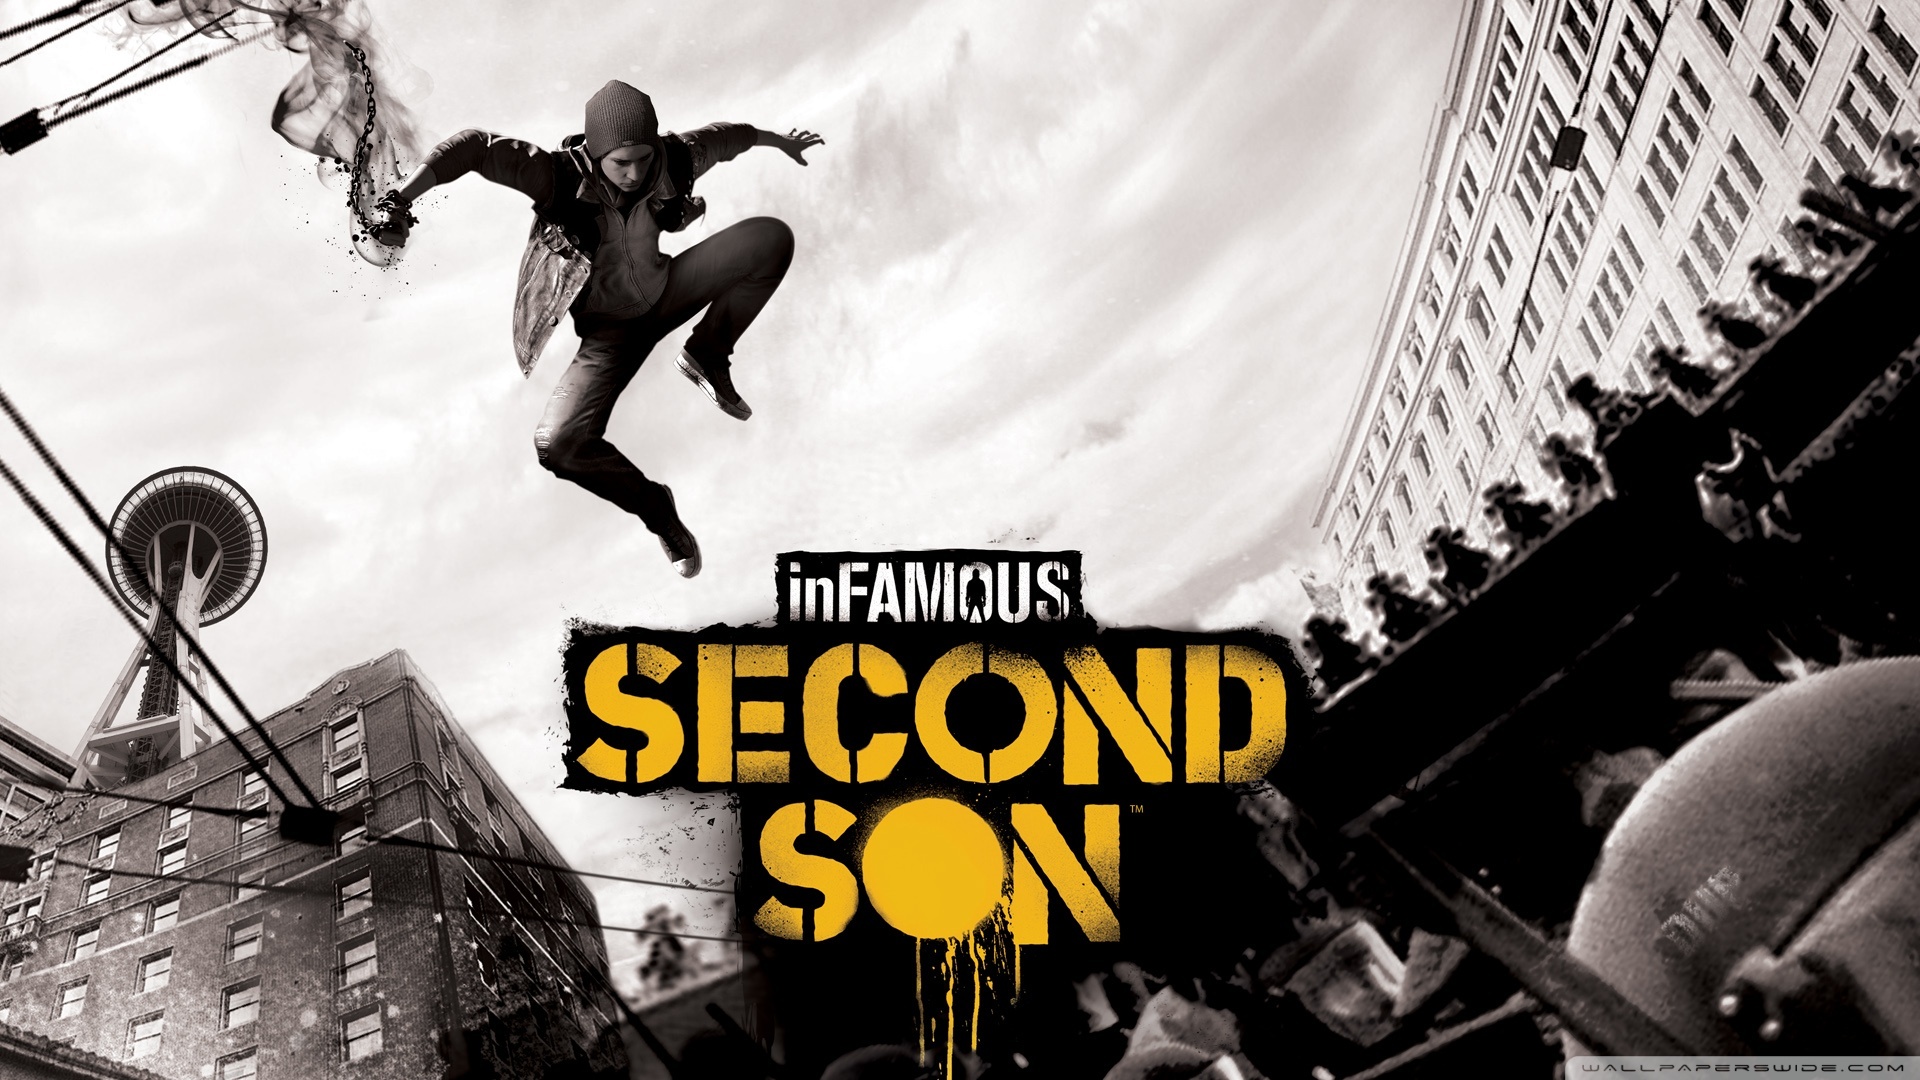 Related Wallpapers - Infamous Second Son , HD Wallpaper & Backgrounds